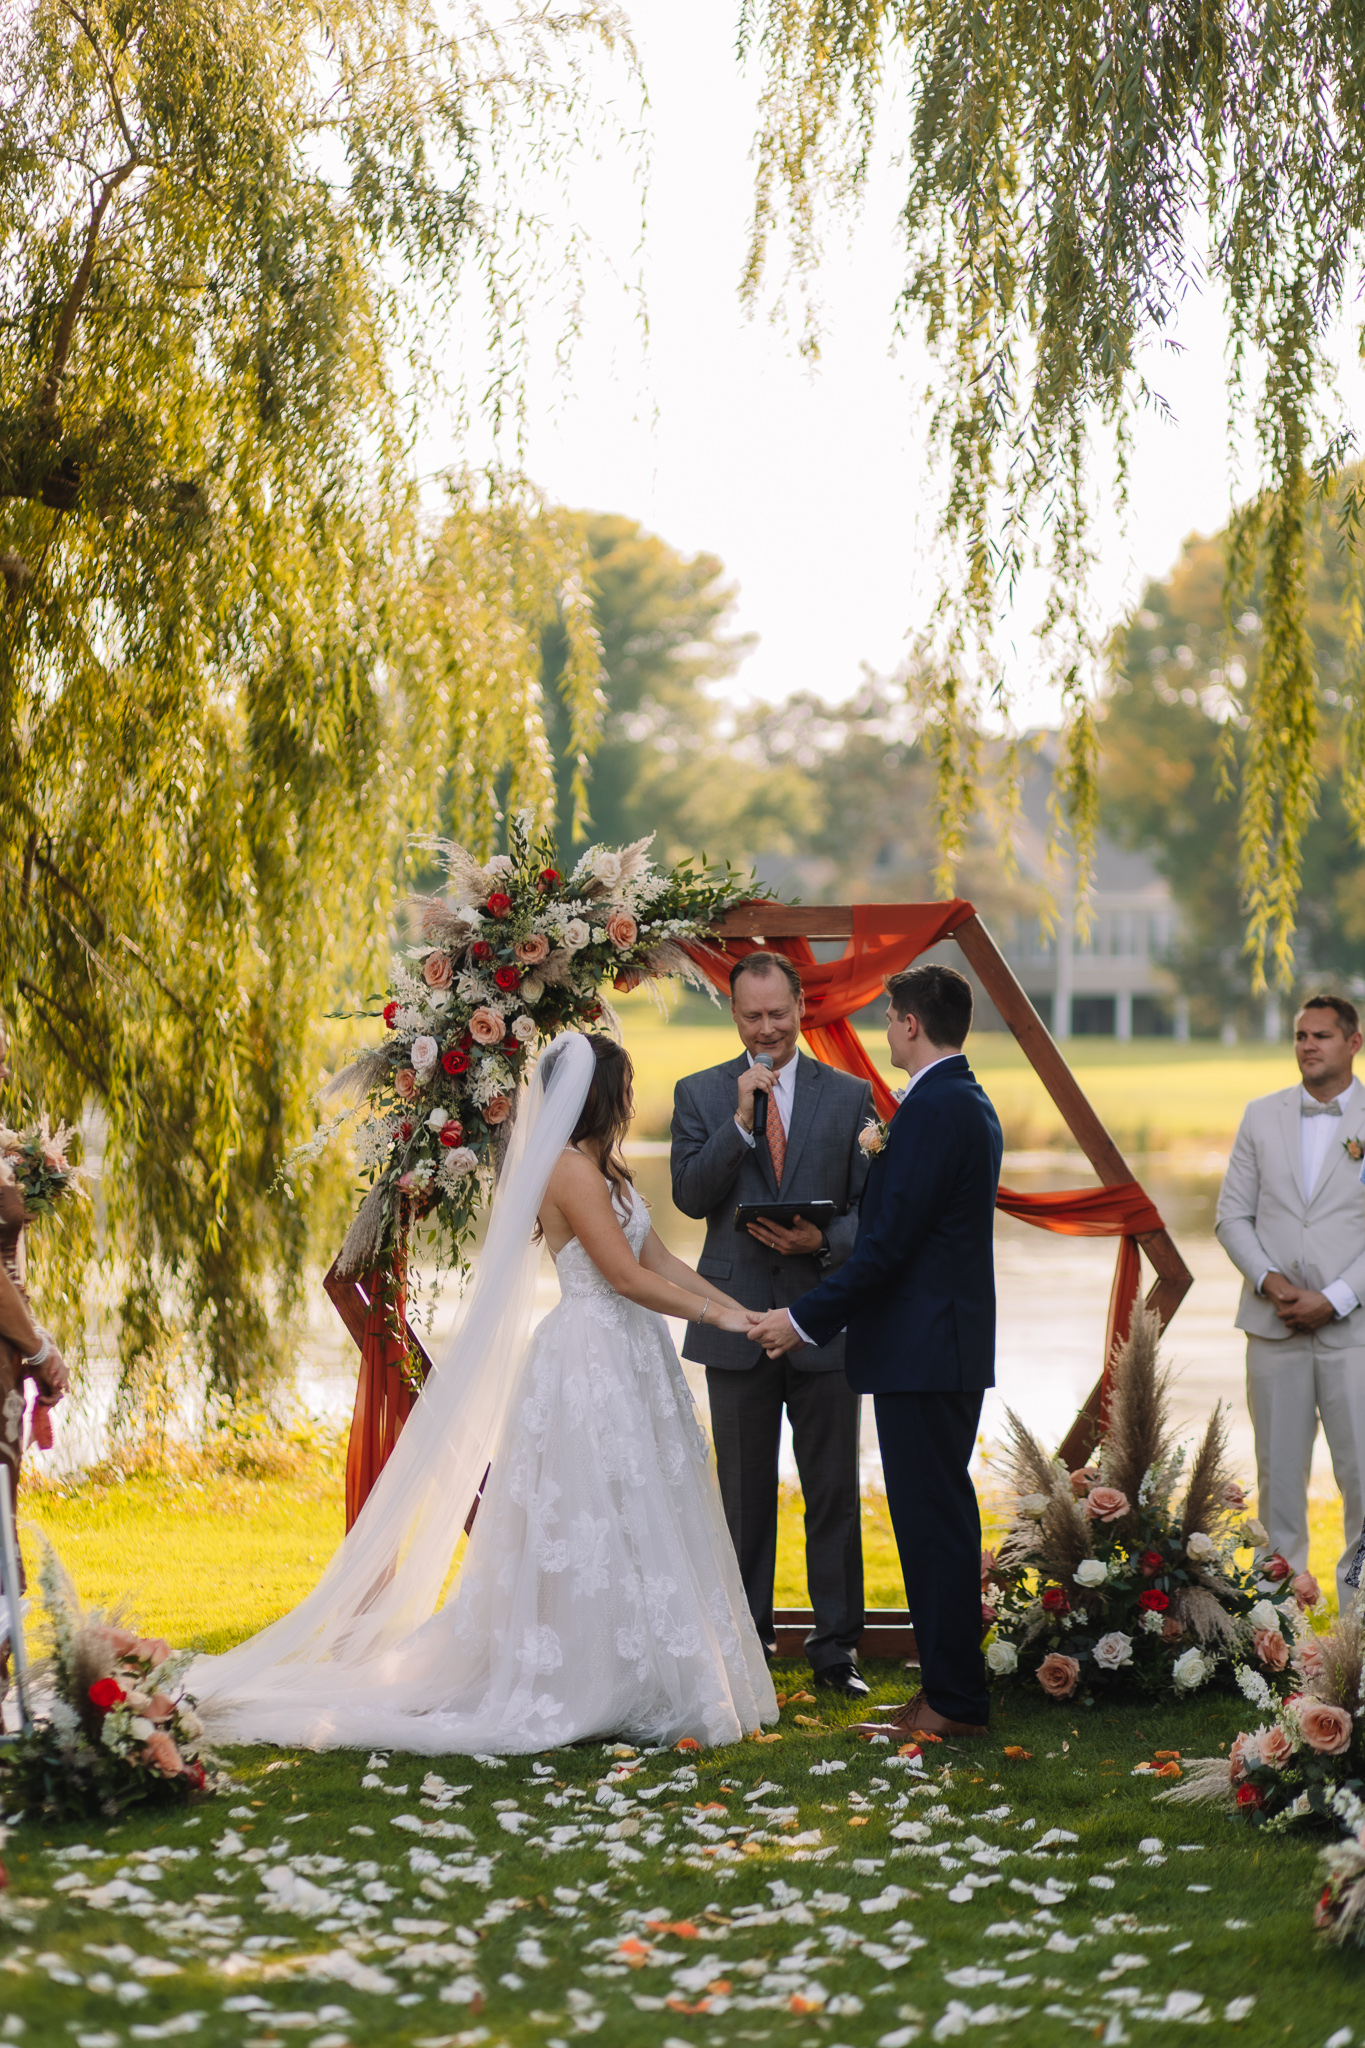 Ceremony Spot between the Willow trees at Oak Glen Golf Club in Stillwater, MN